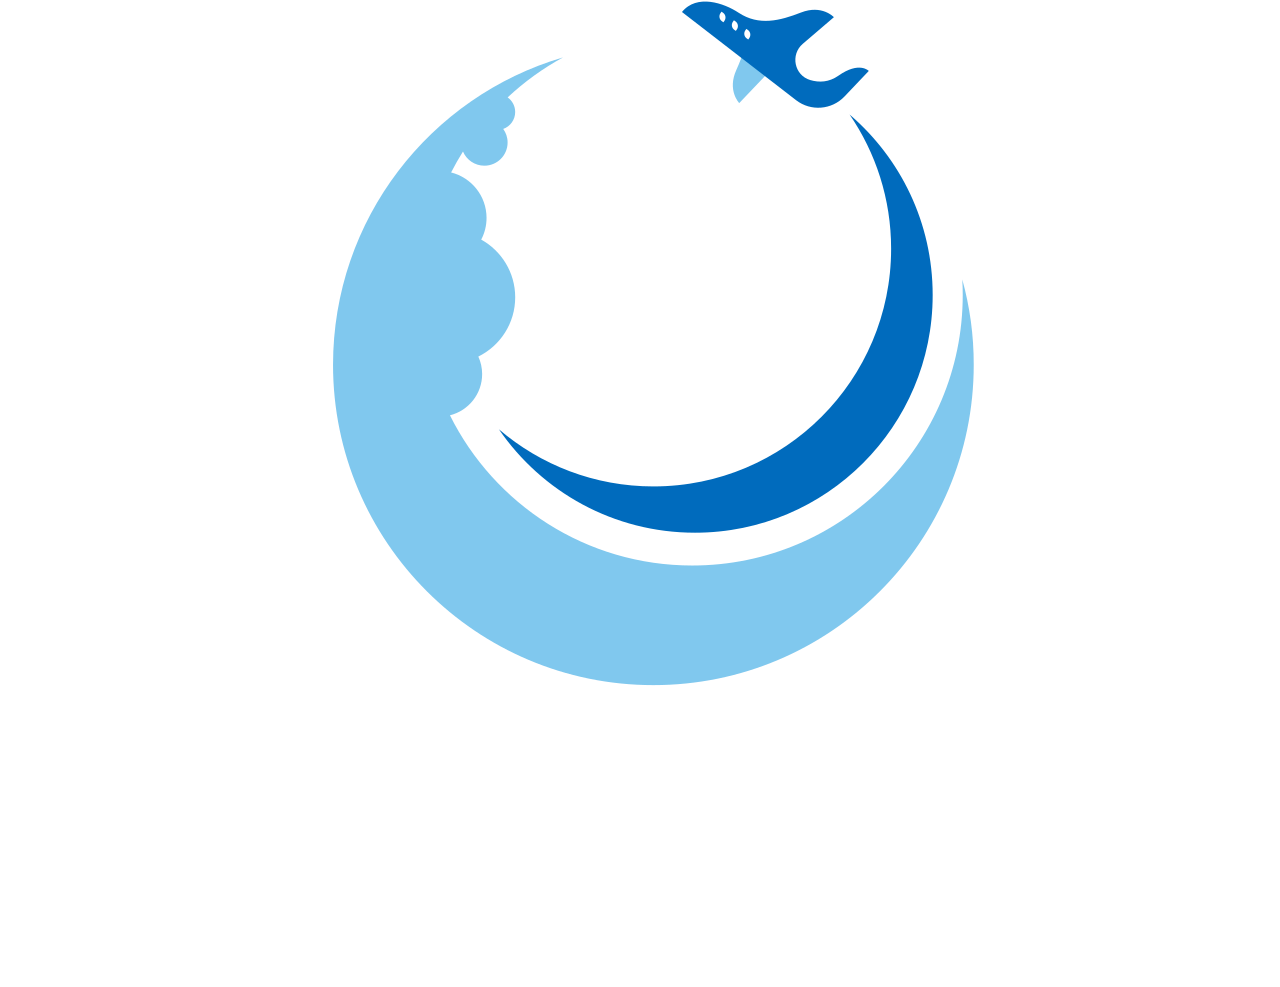 Hurricane Val's 's web page